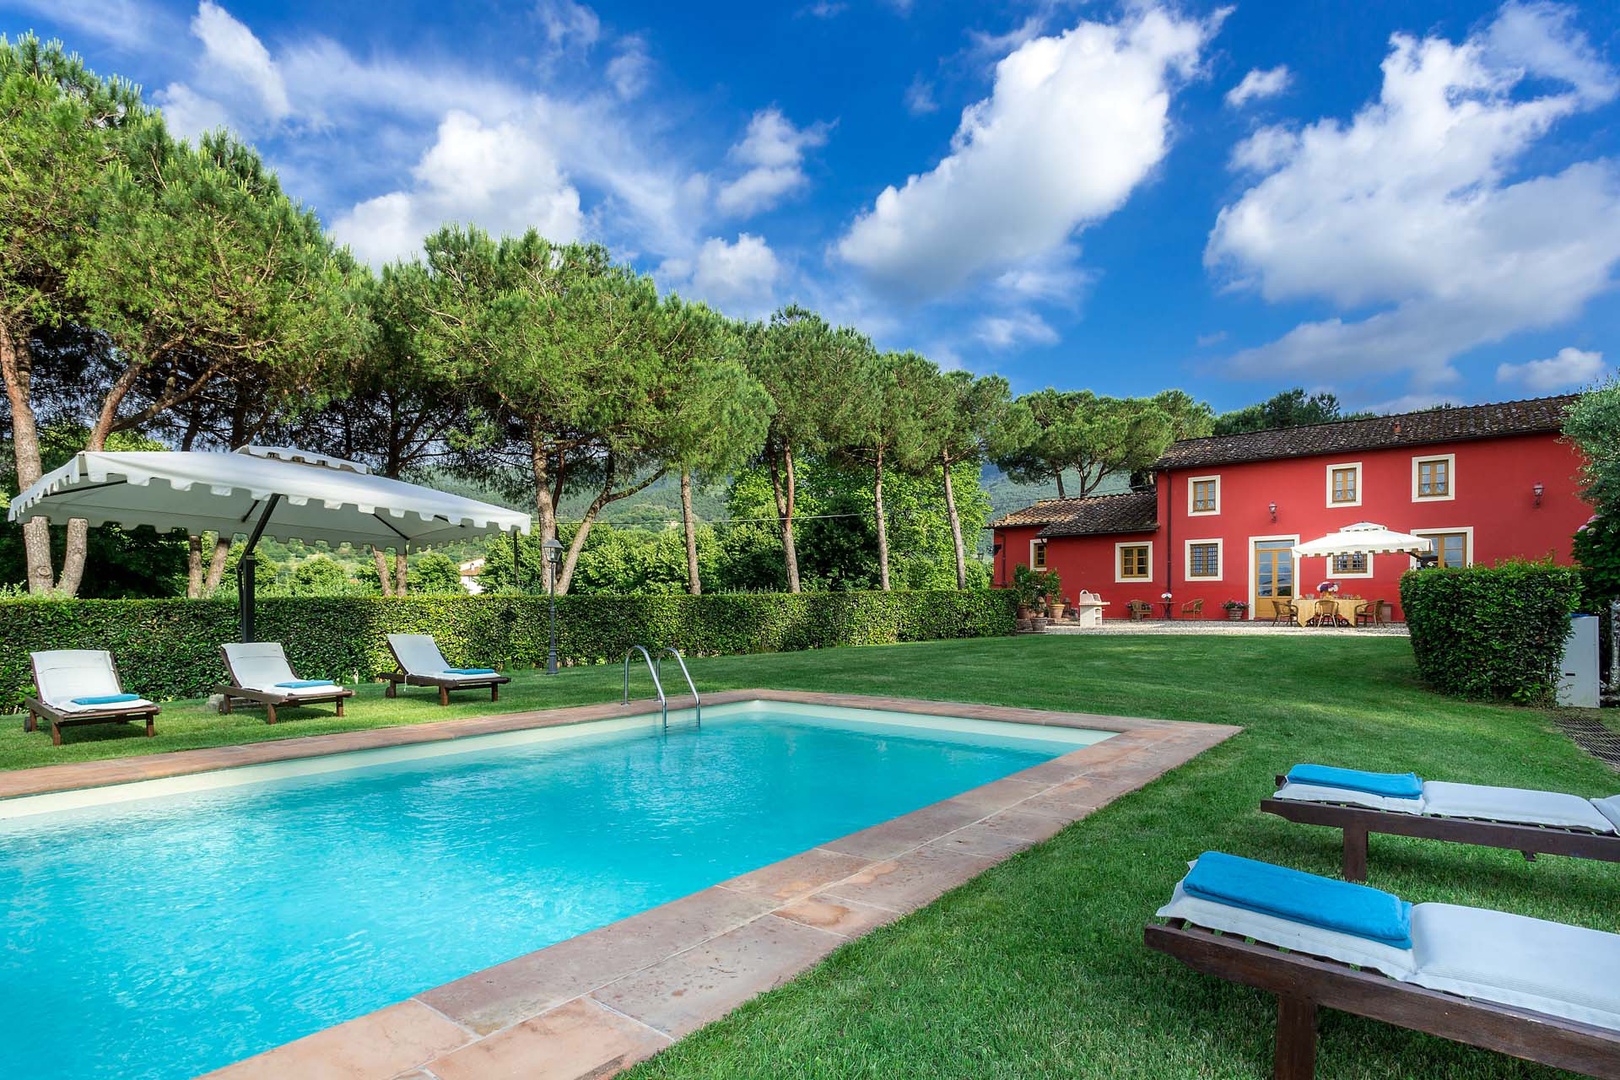 The villa is full of historical allure surrounded by terraced olive groves